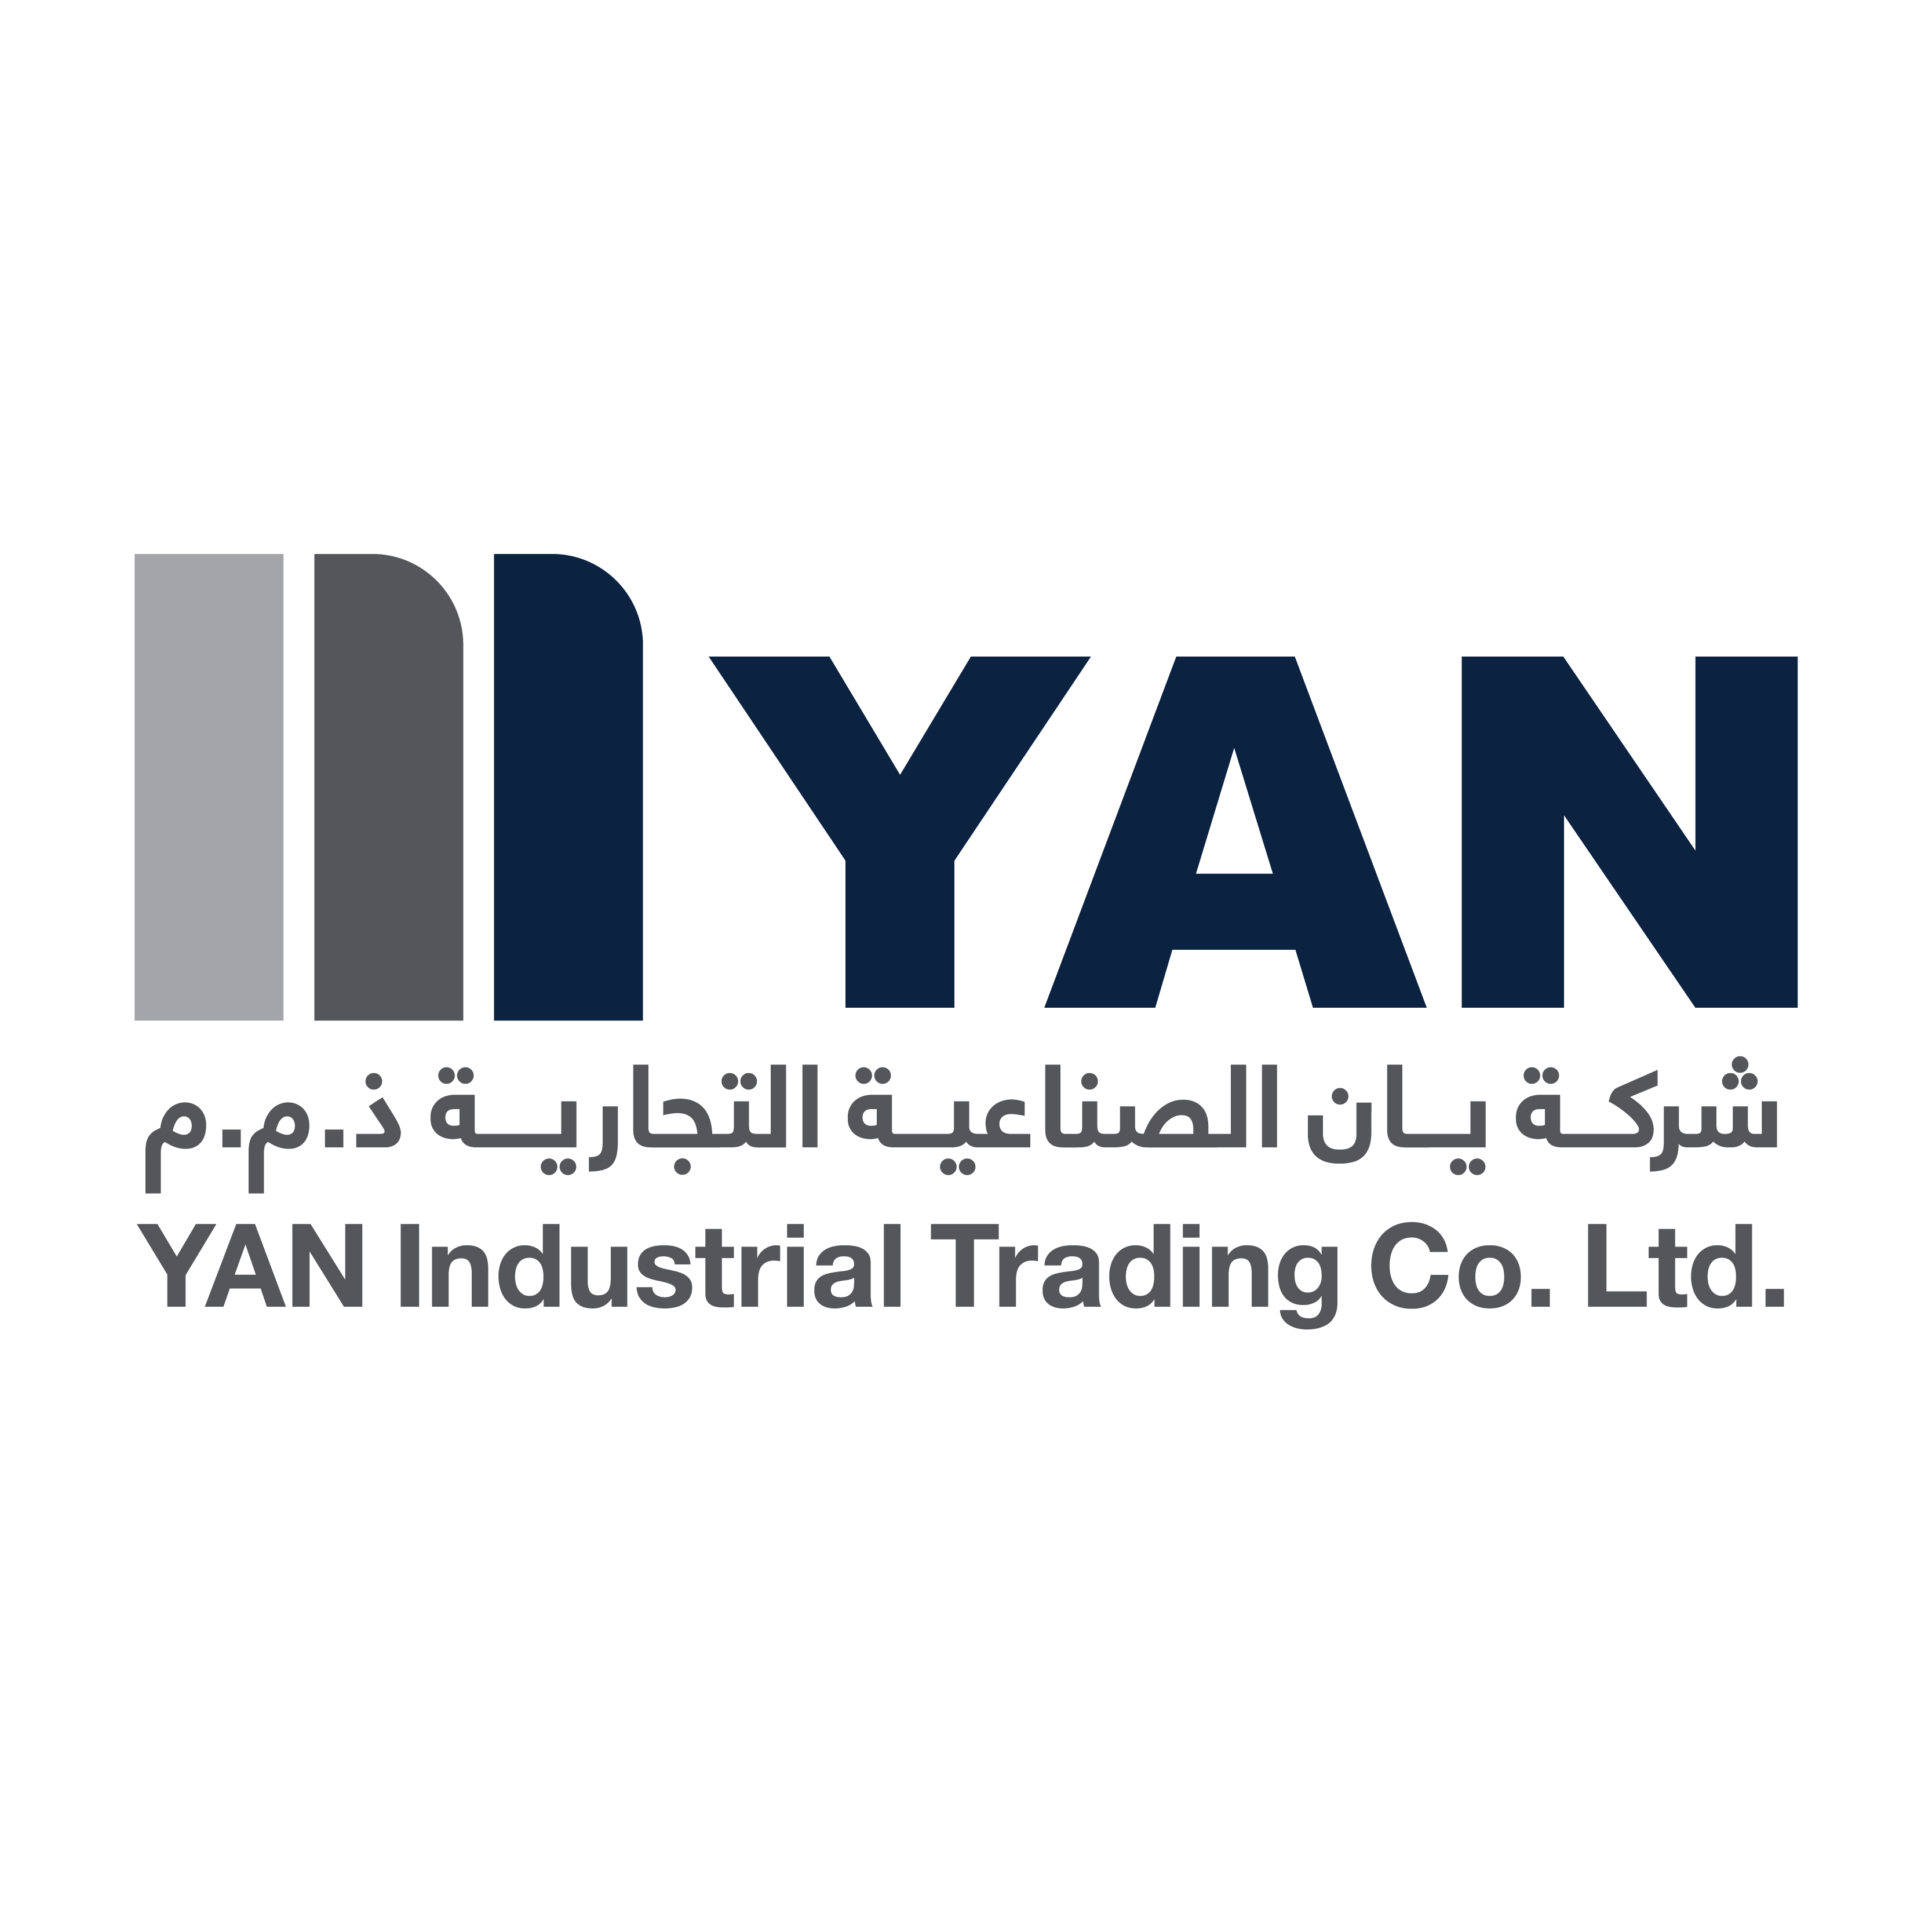 Yan Company For Trading and industry